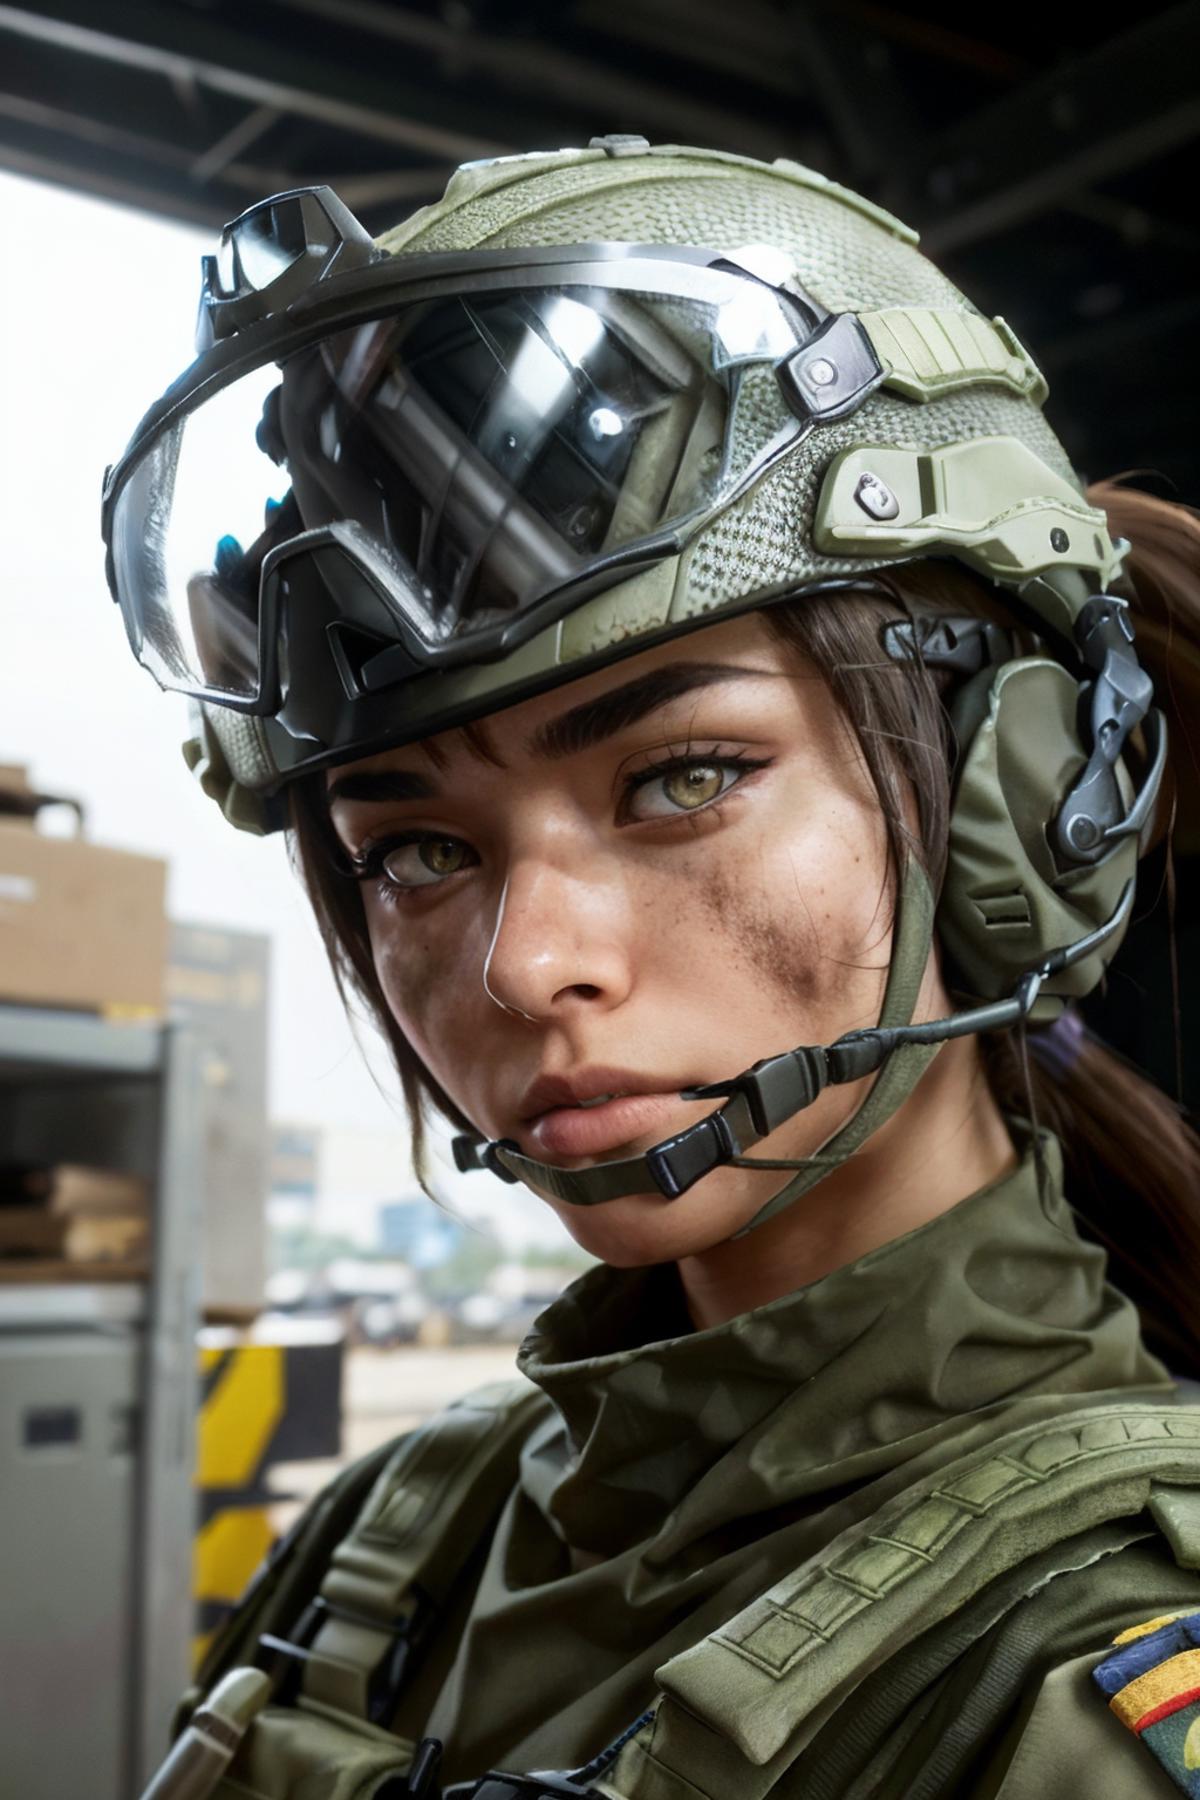 A woman with green eyes wearing a military helmet and a uniform.